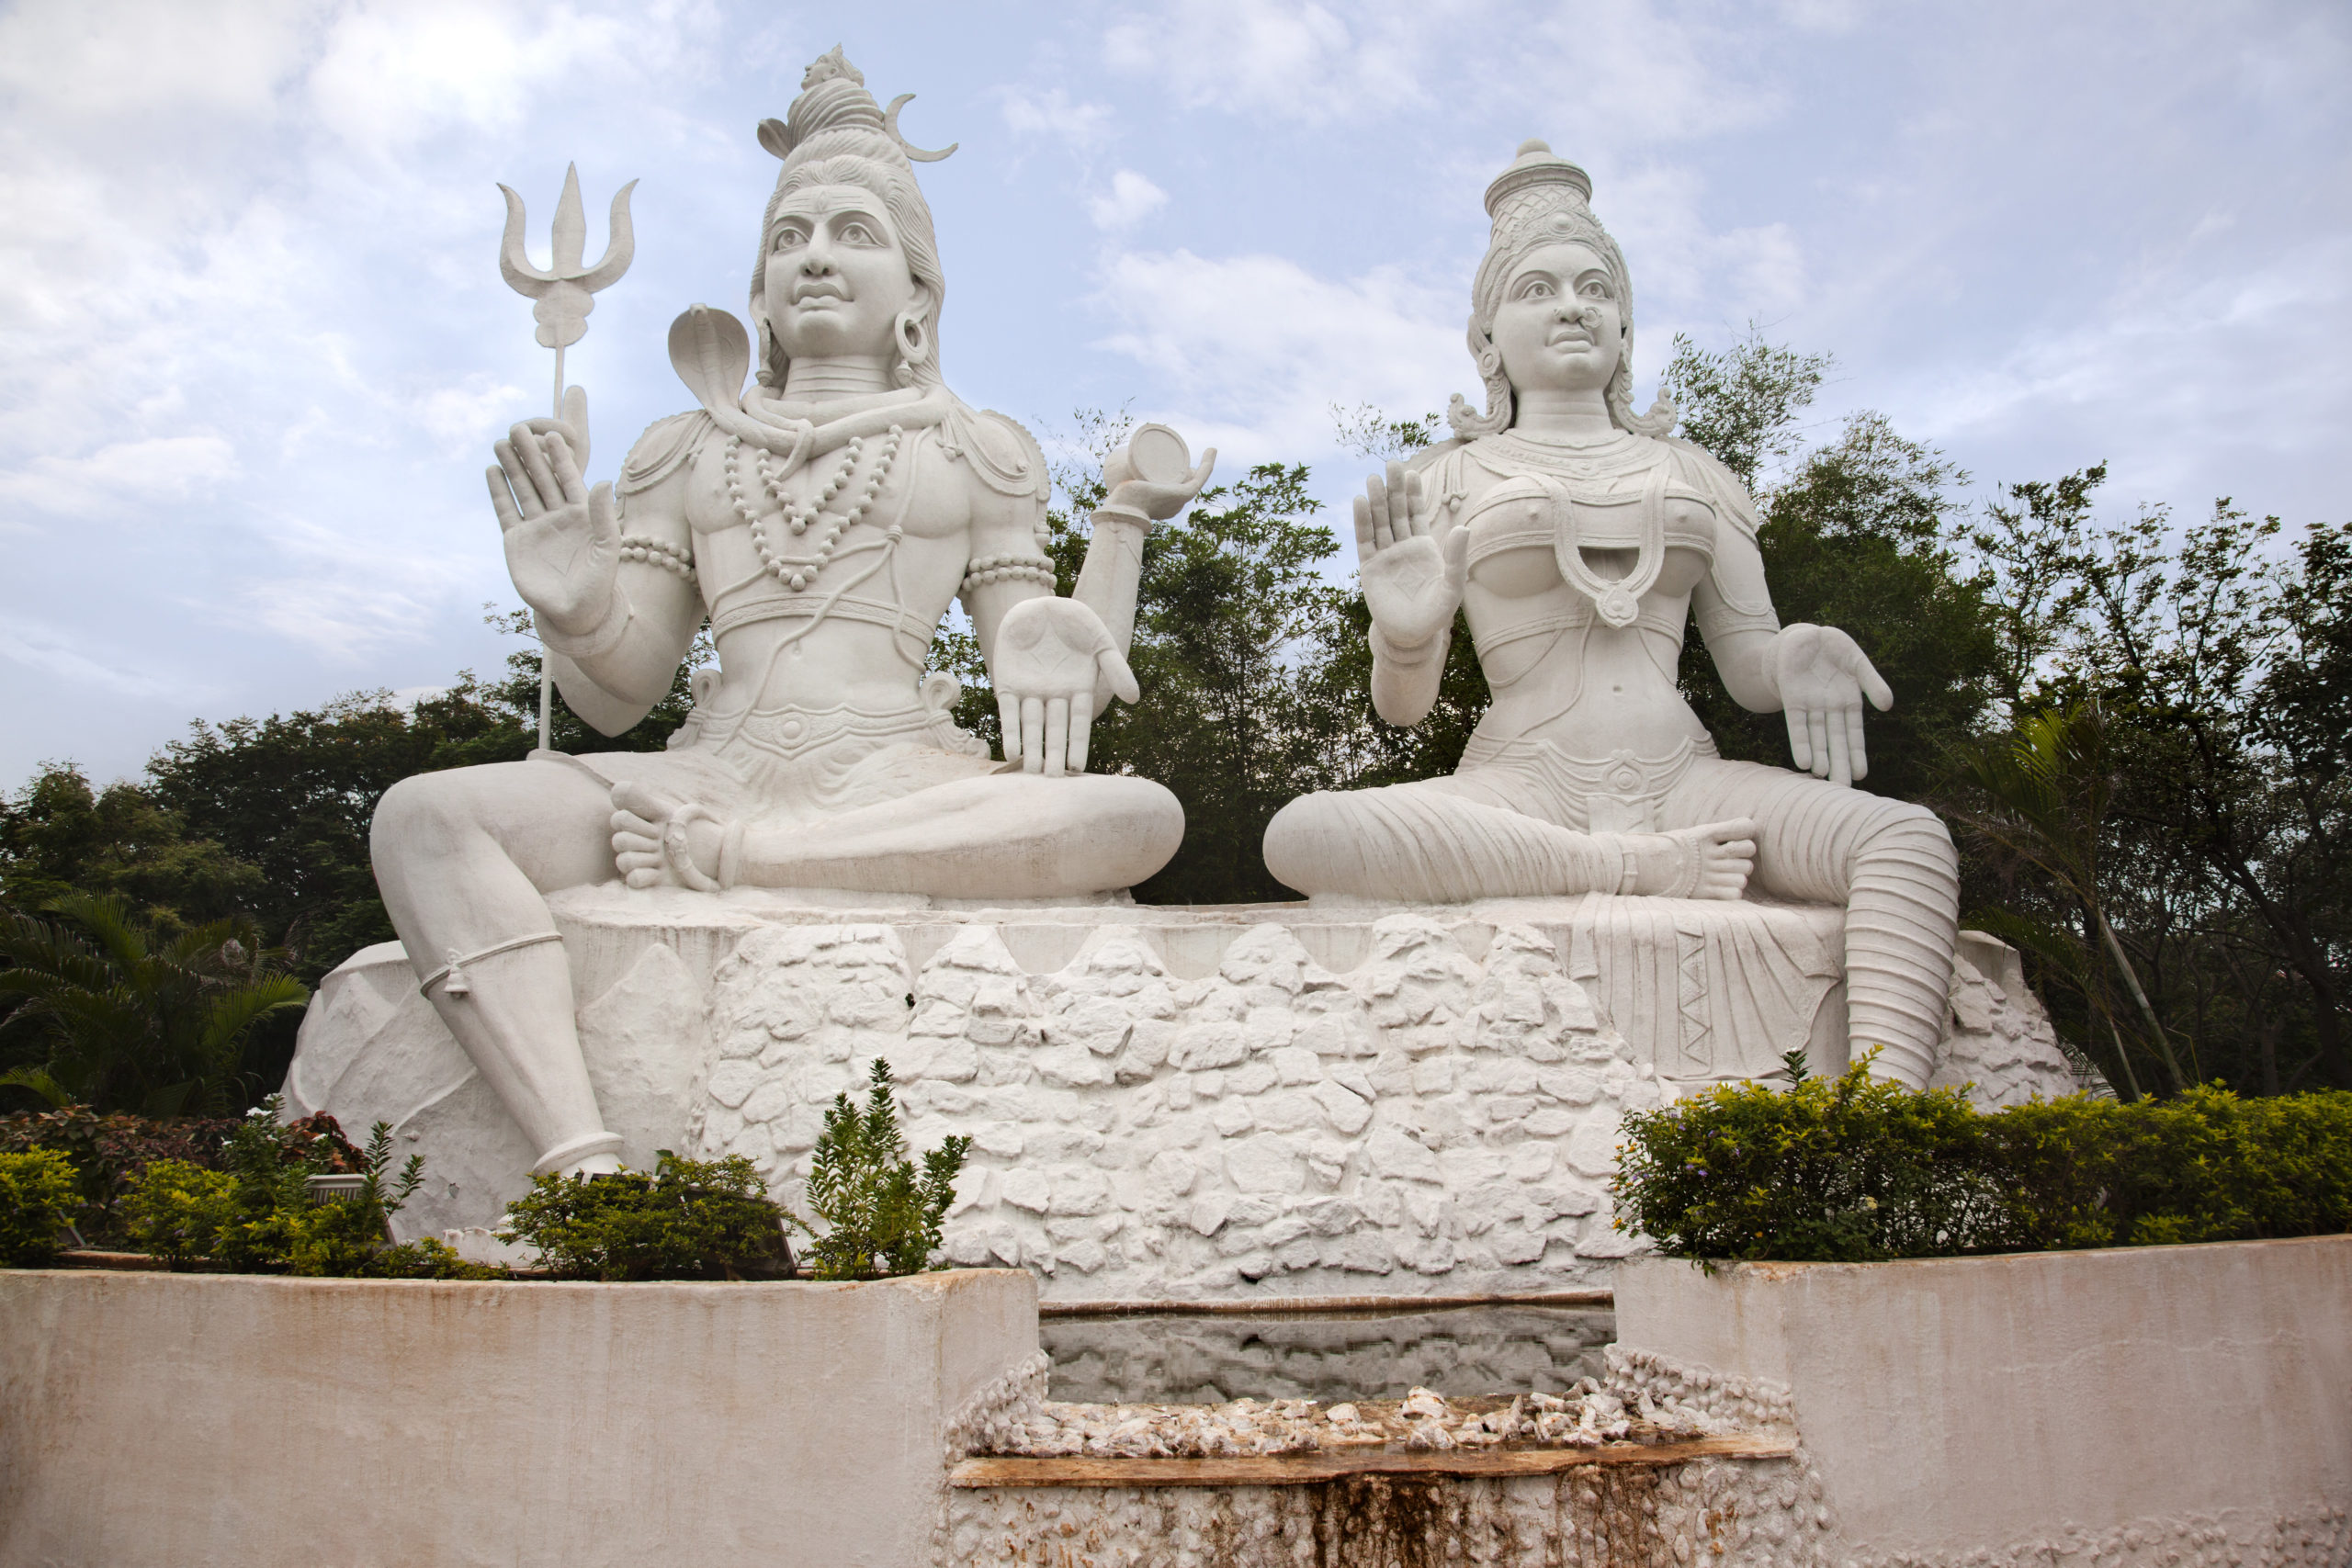 Statues of lord shiva and goddess parvathi, India